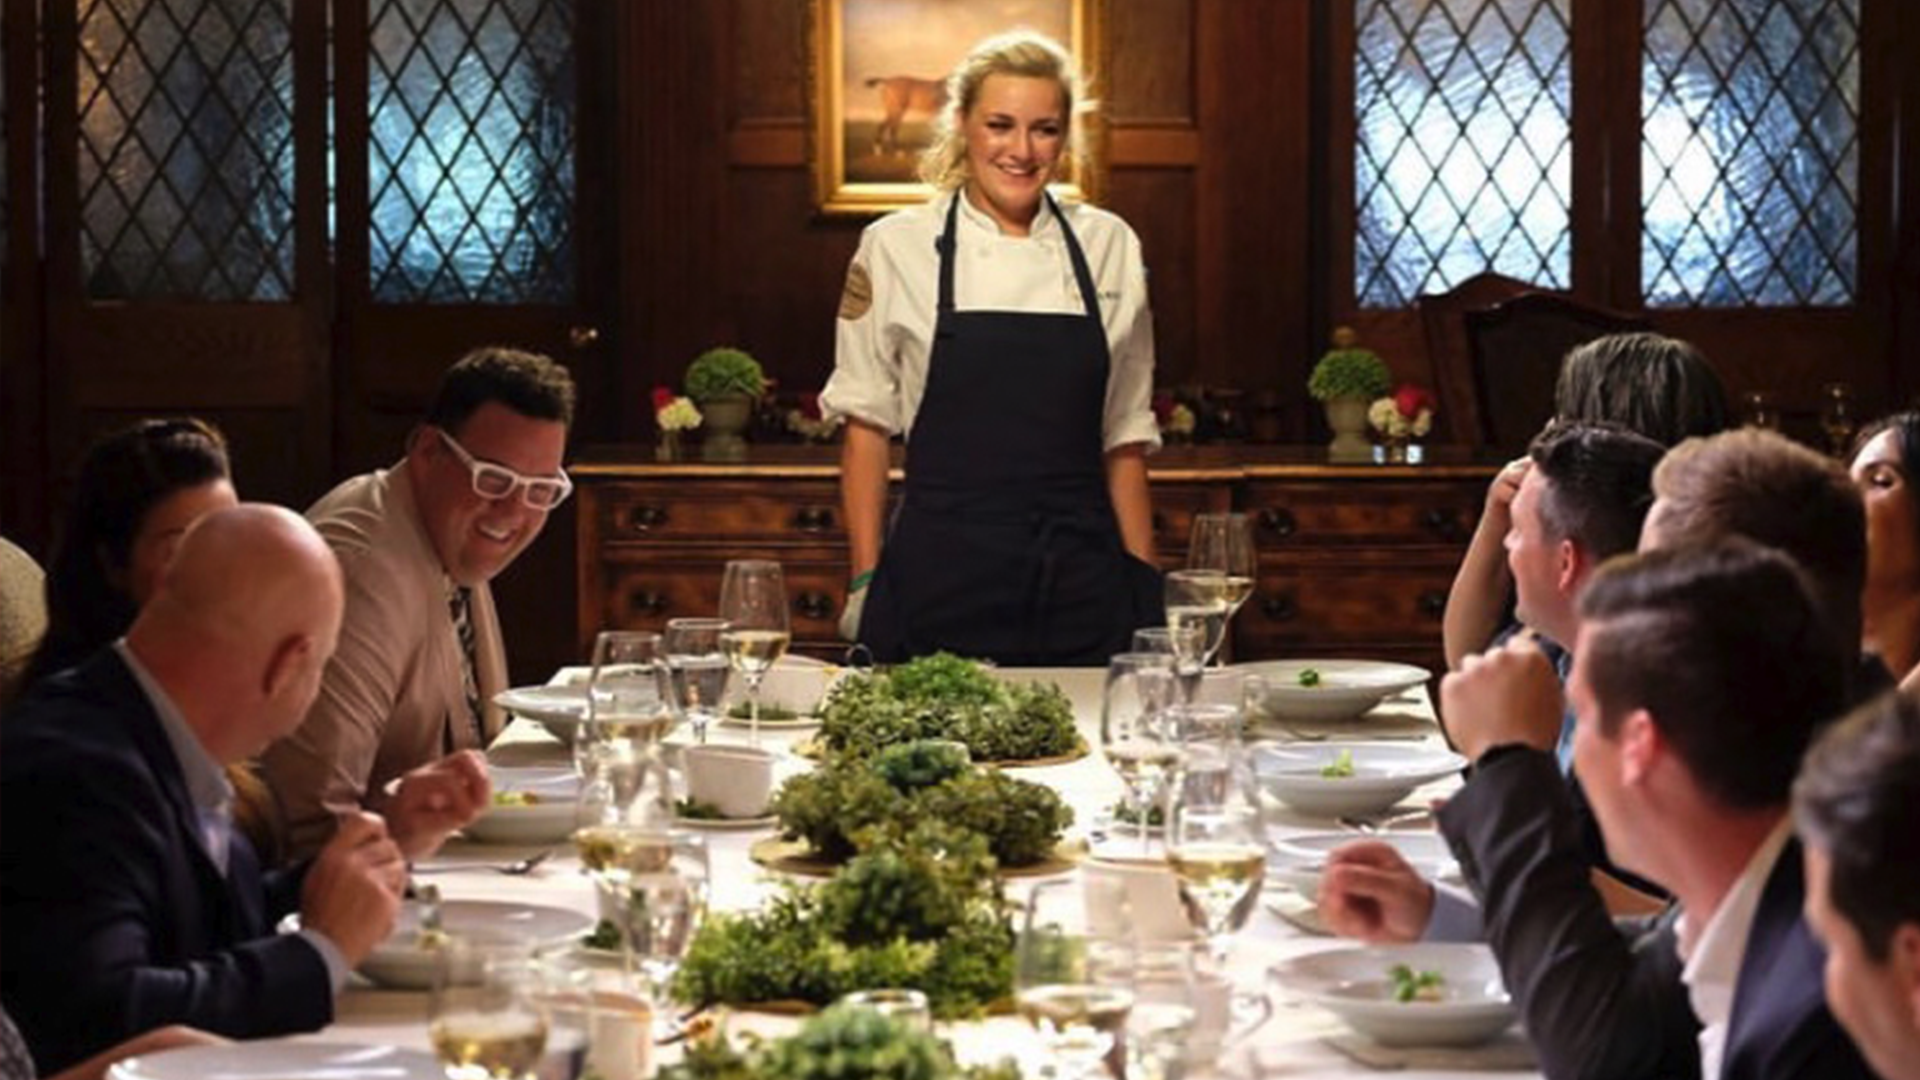 Top Chef Season 16 was in Lexington, Kentucky and Bryant's Rent-All provided equipment for the cast.